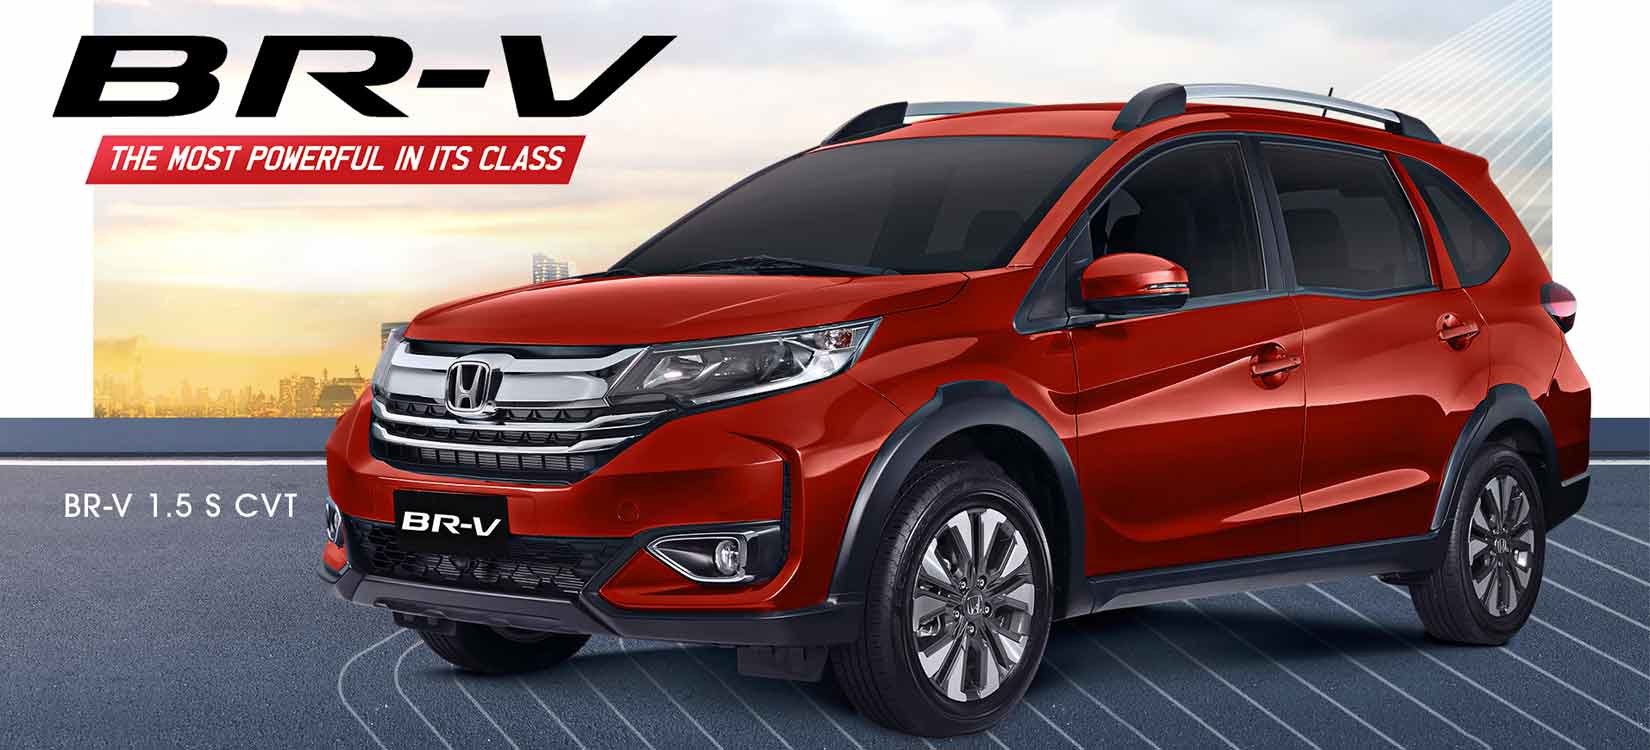 Honda Cars Philippines › 7 Reasons why the Honda BR-V is the perfect  companion for your road trips